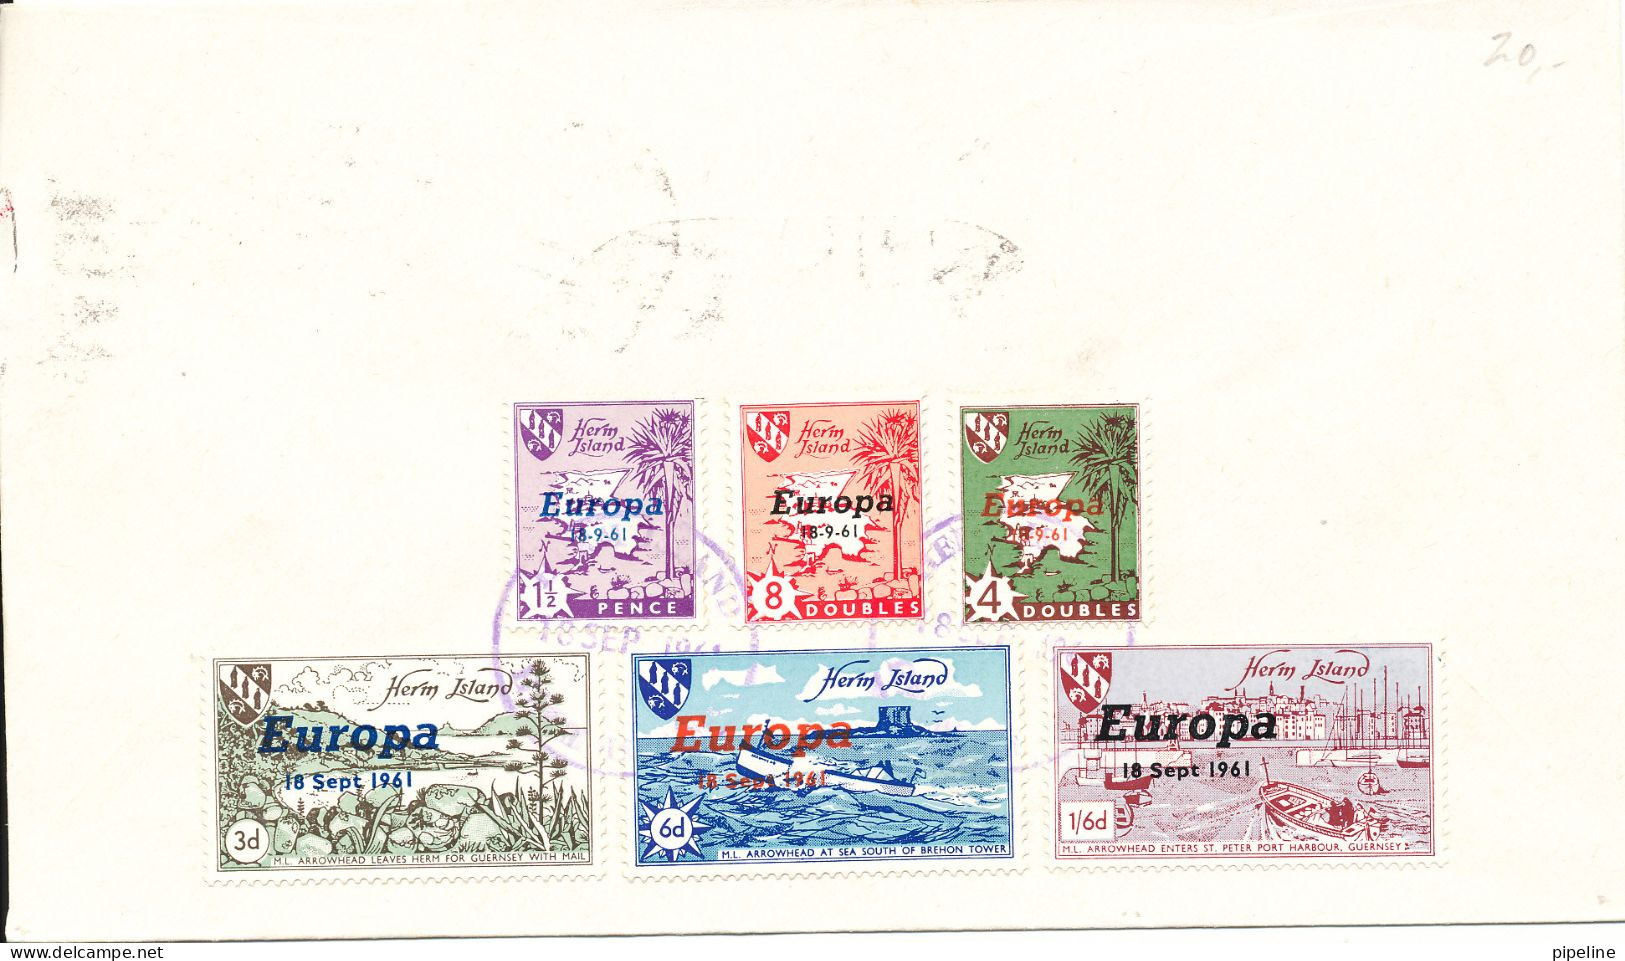 Great Britain FDC EUROPA CEPT 18-9-1961 And 6 HERM ISLAND EUROPA Stamps On The Backside Og The Cover - 1961